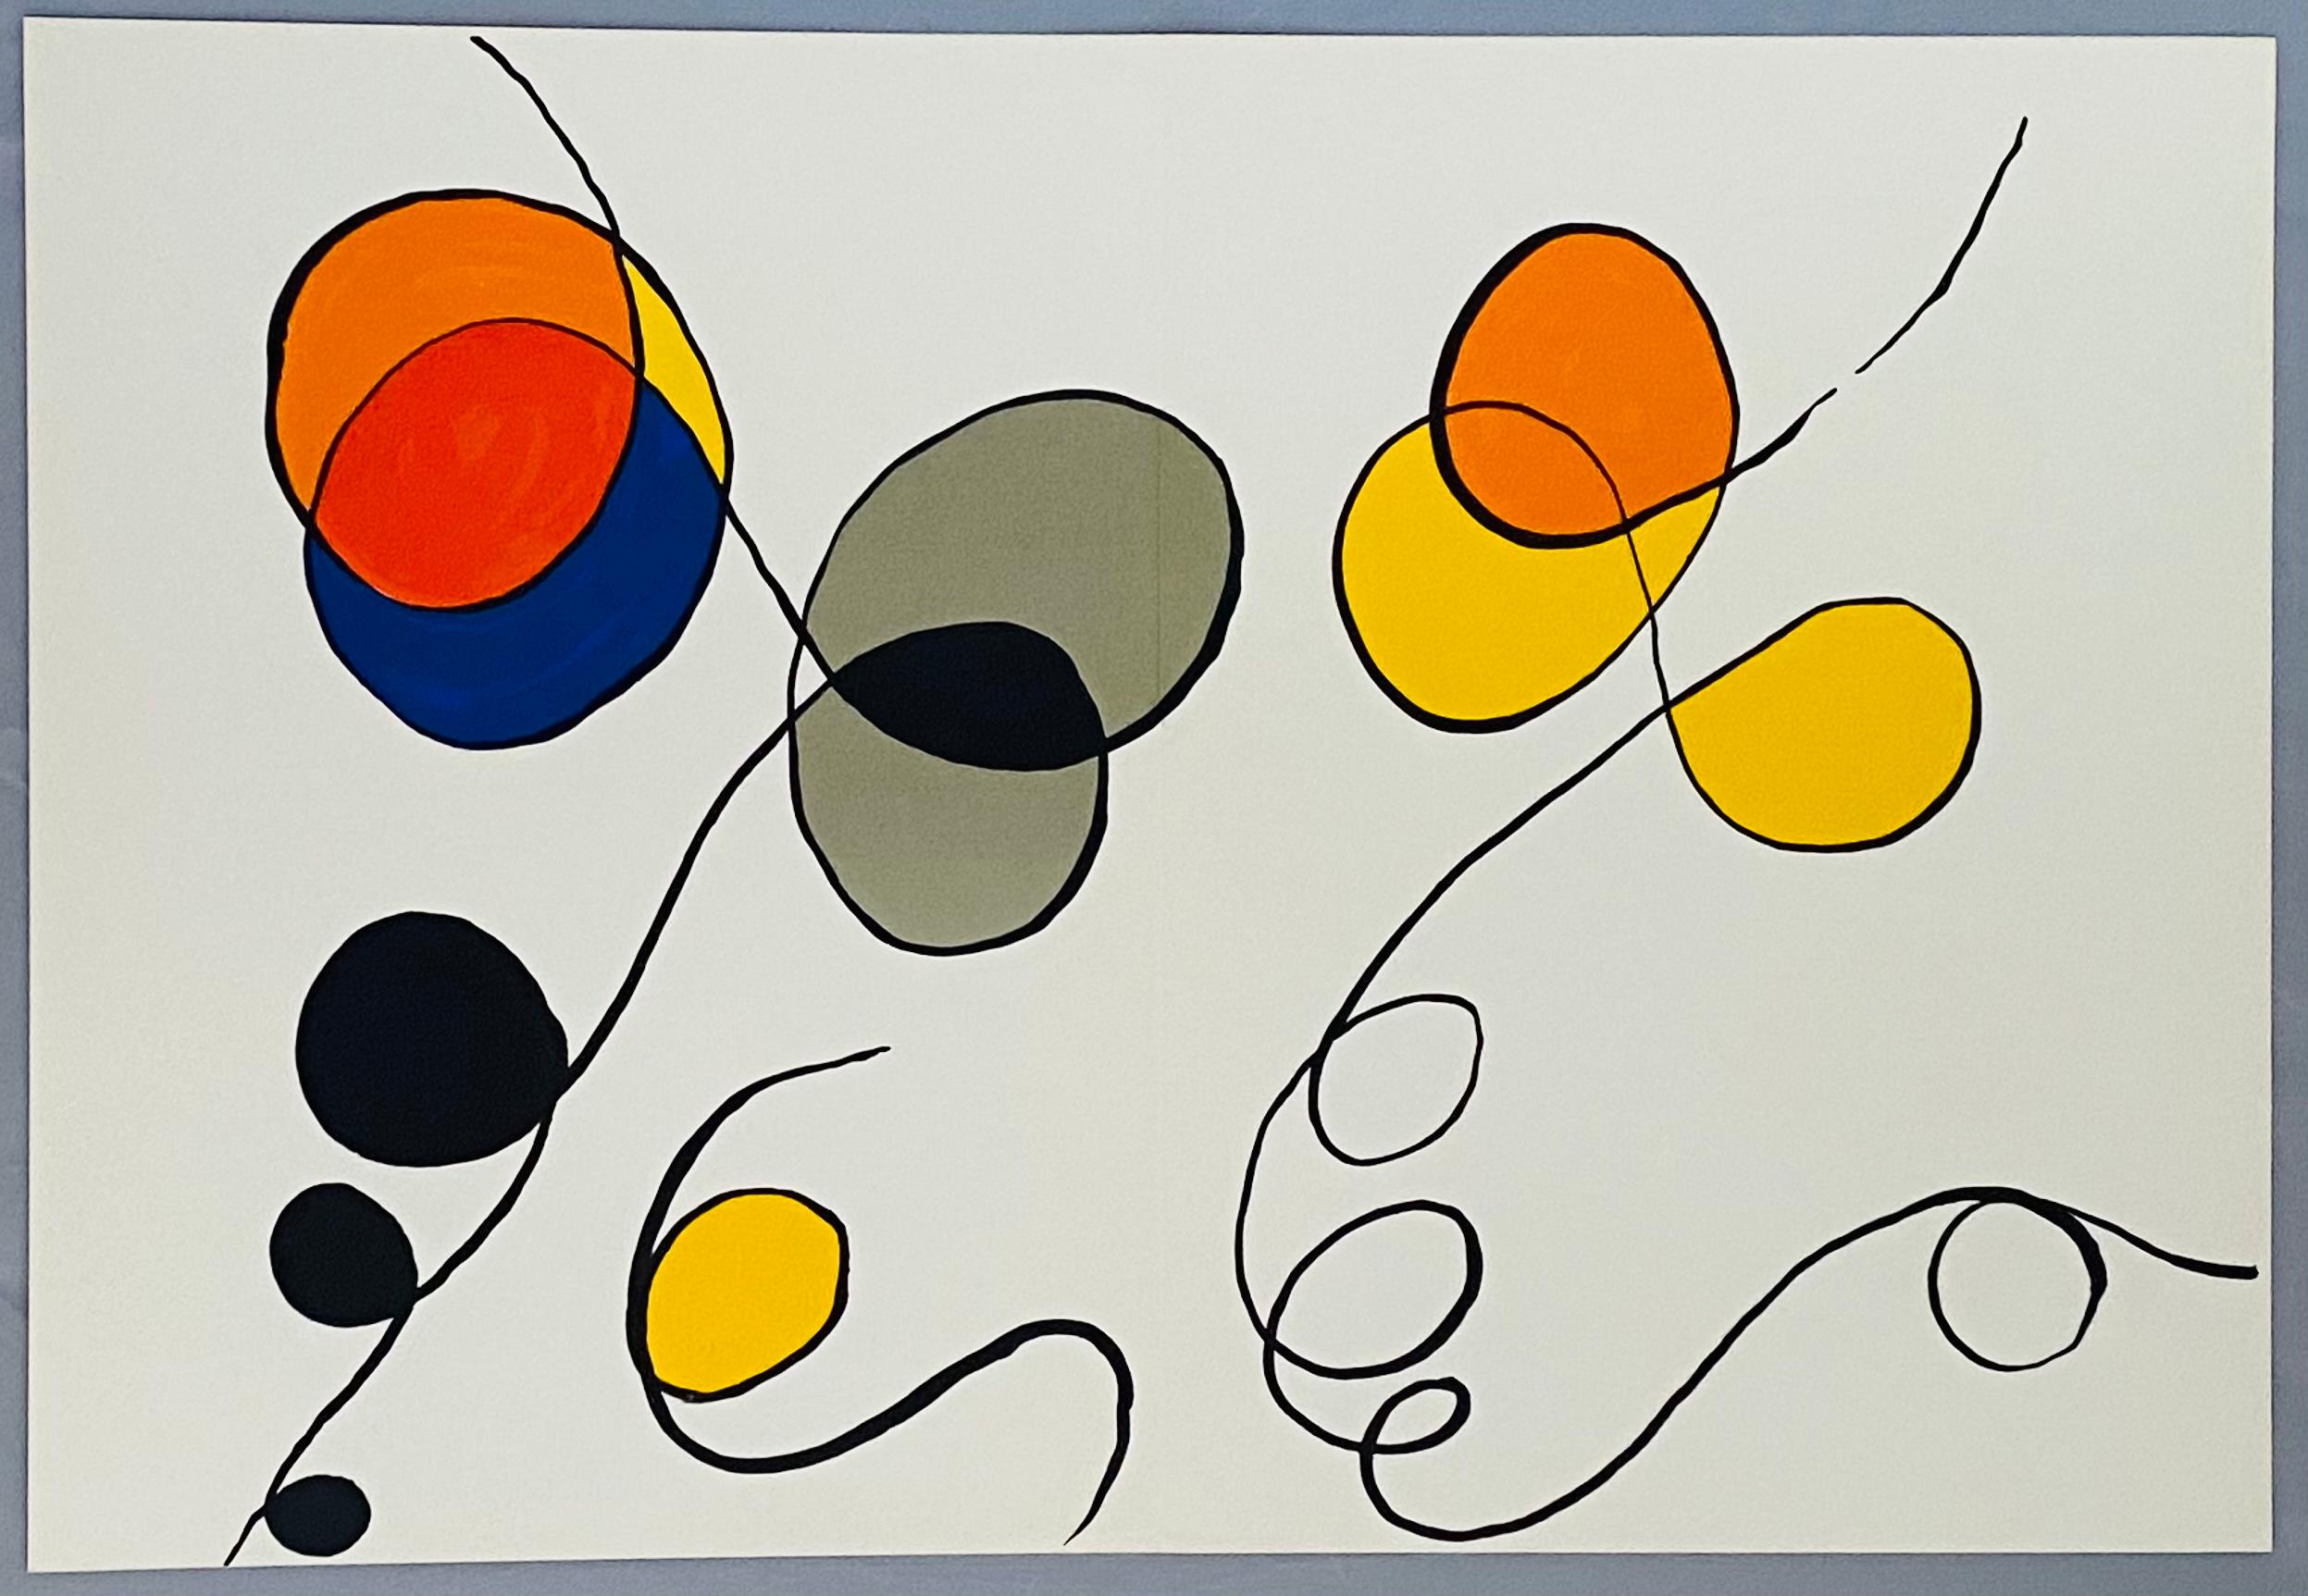 Original 1960s Alexander Calder lithograph:

Dimensions: 15 x 22 inches.

Portfolio: Derriere Le Miroir. Published by: Galerie Maeght, Paris, 1968.

Very good overall vintage condition with well preserved colors. Contains a center fold-line as